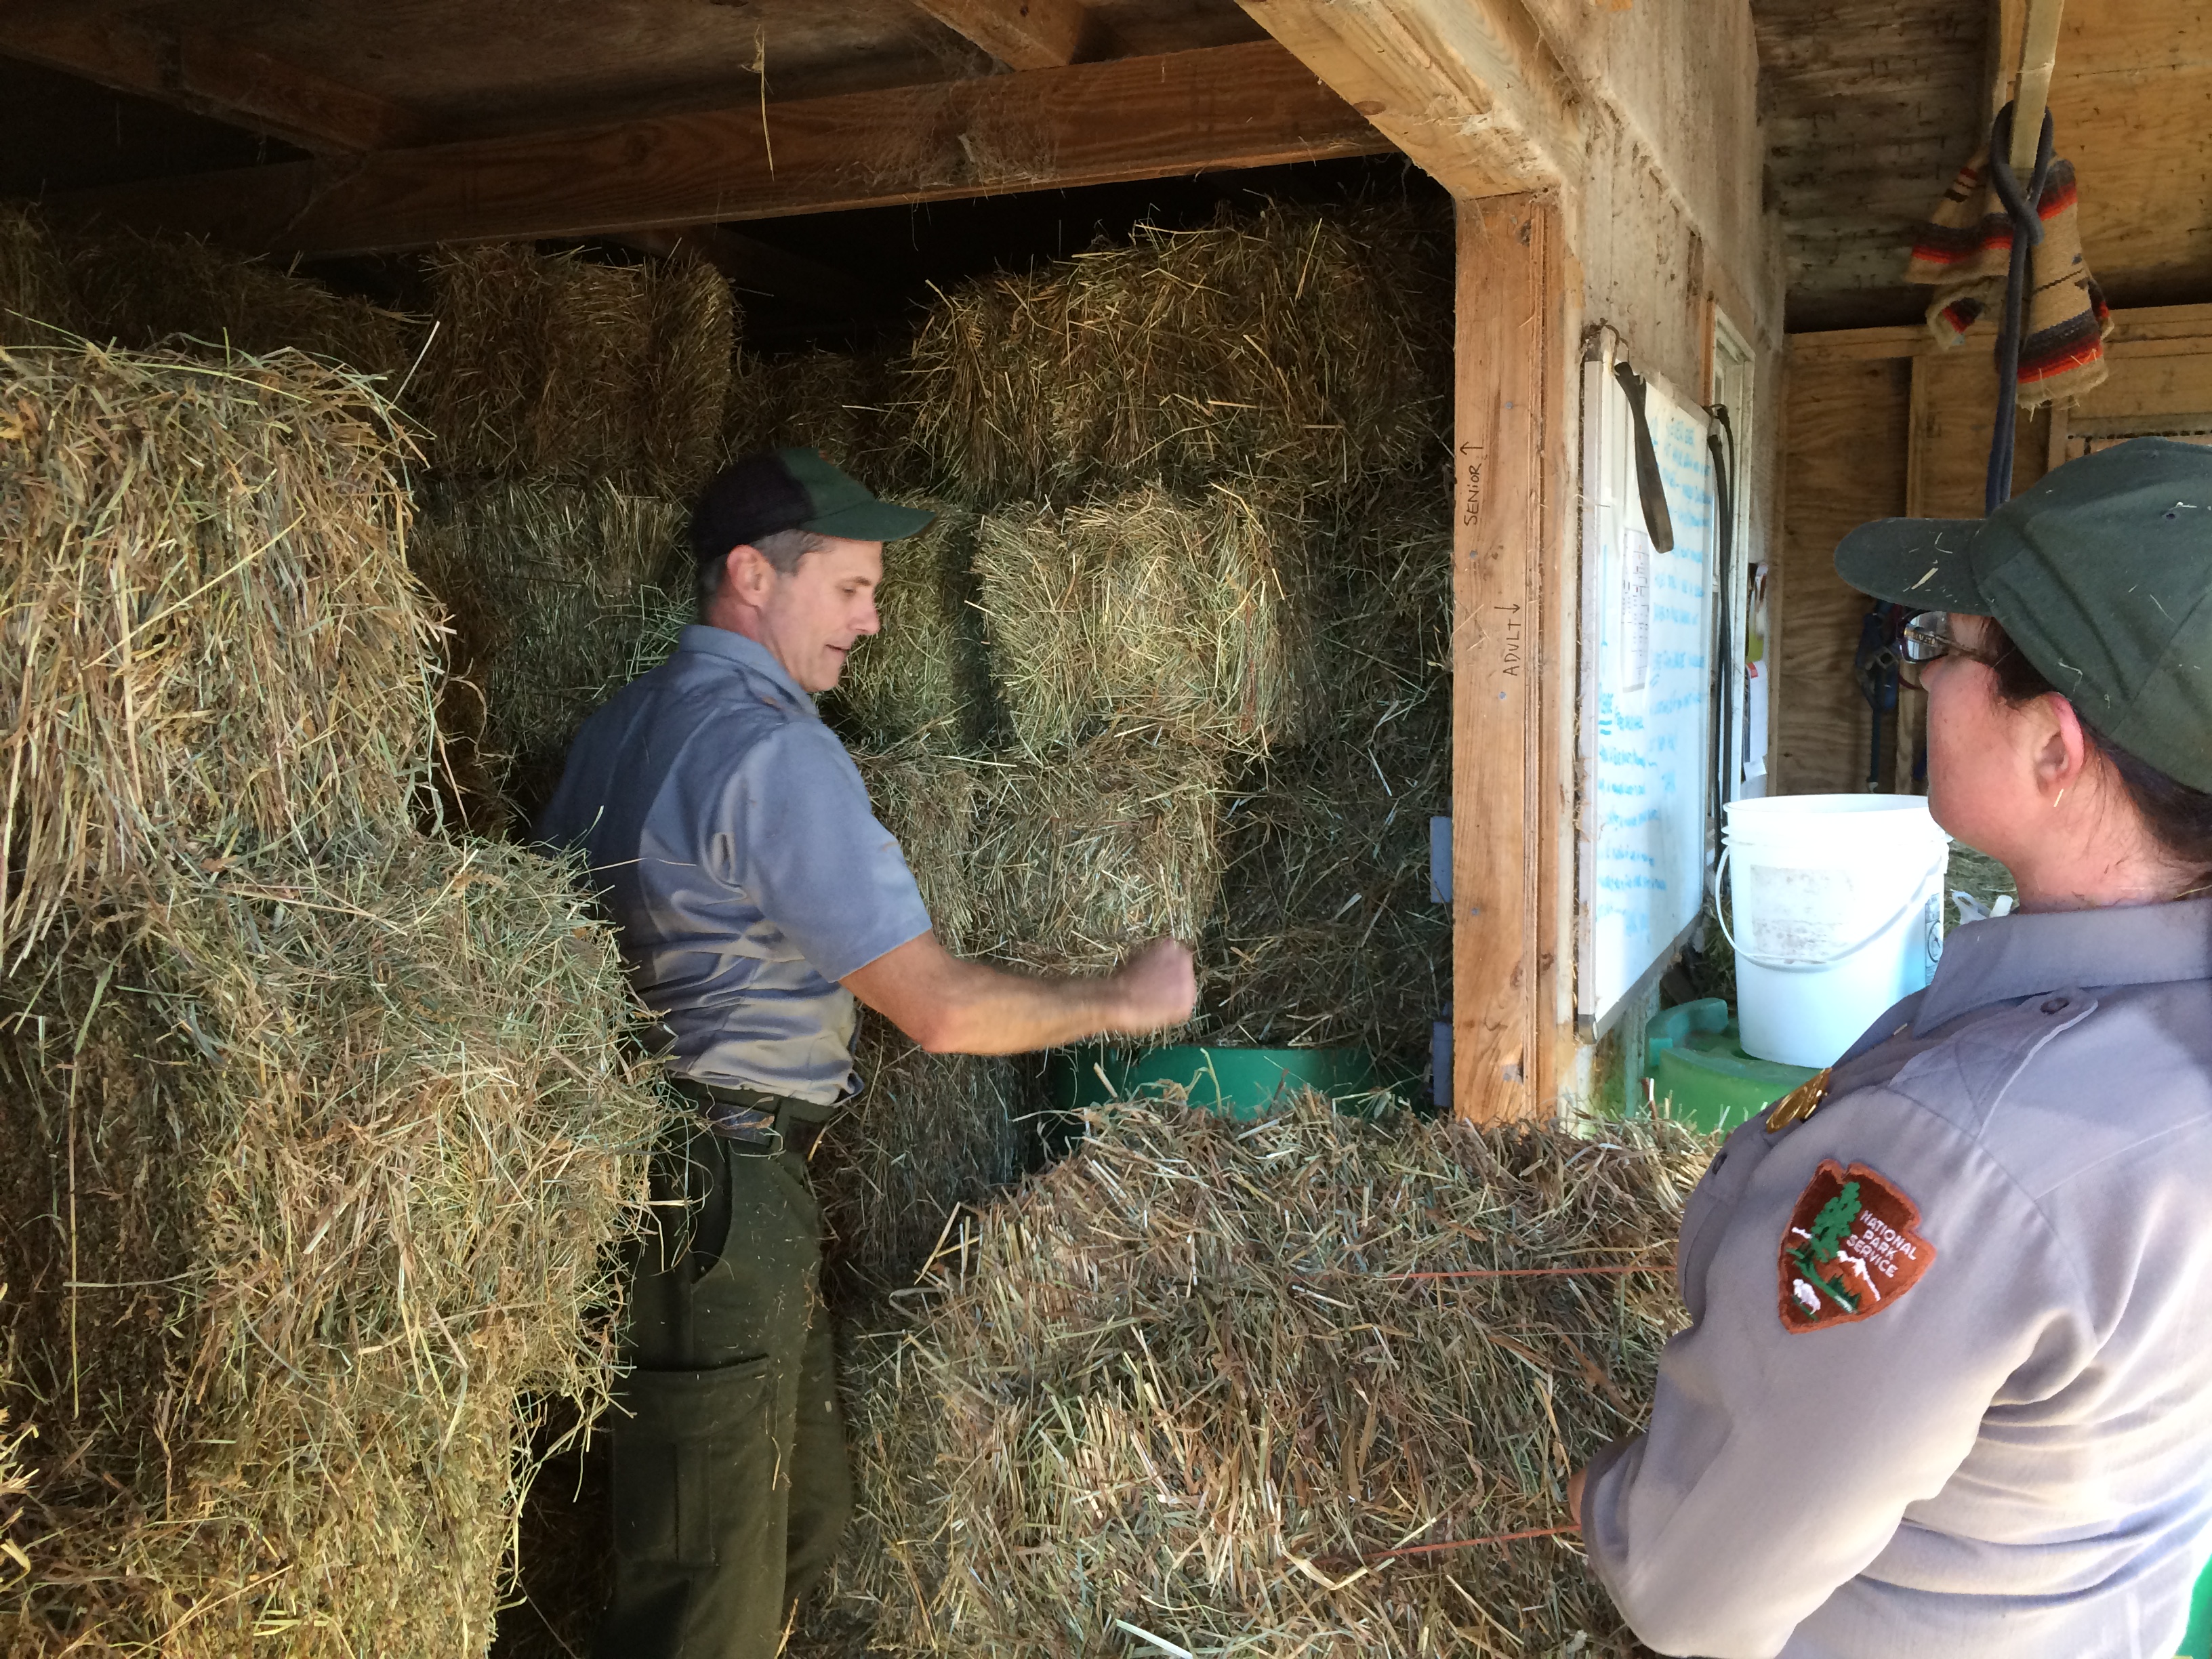 Staff unload hay for the ponies.